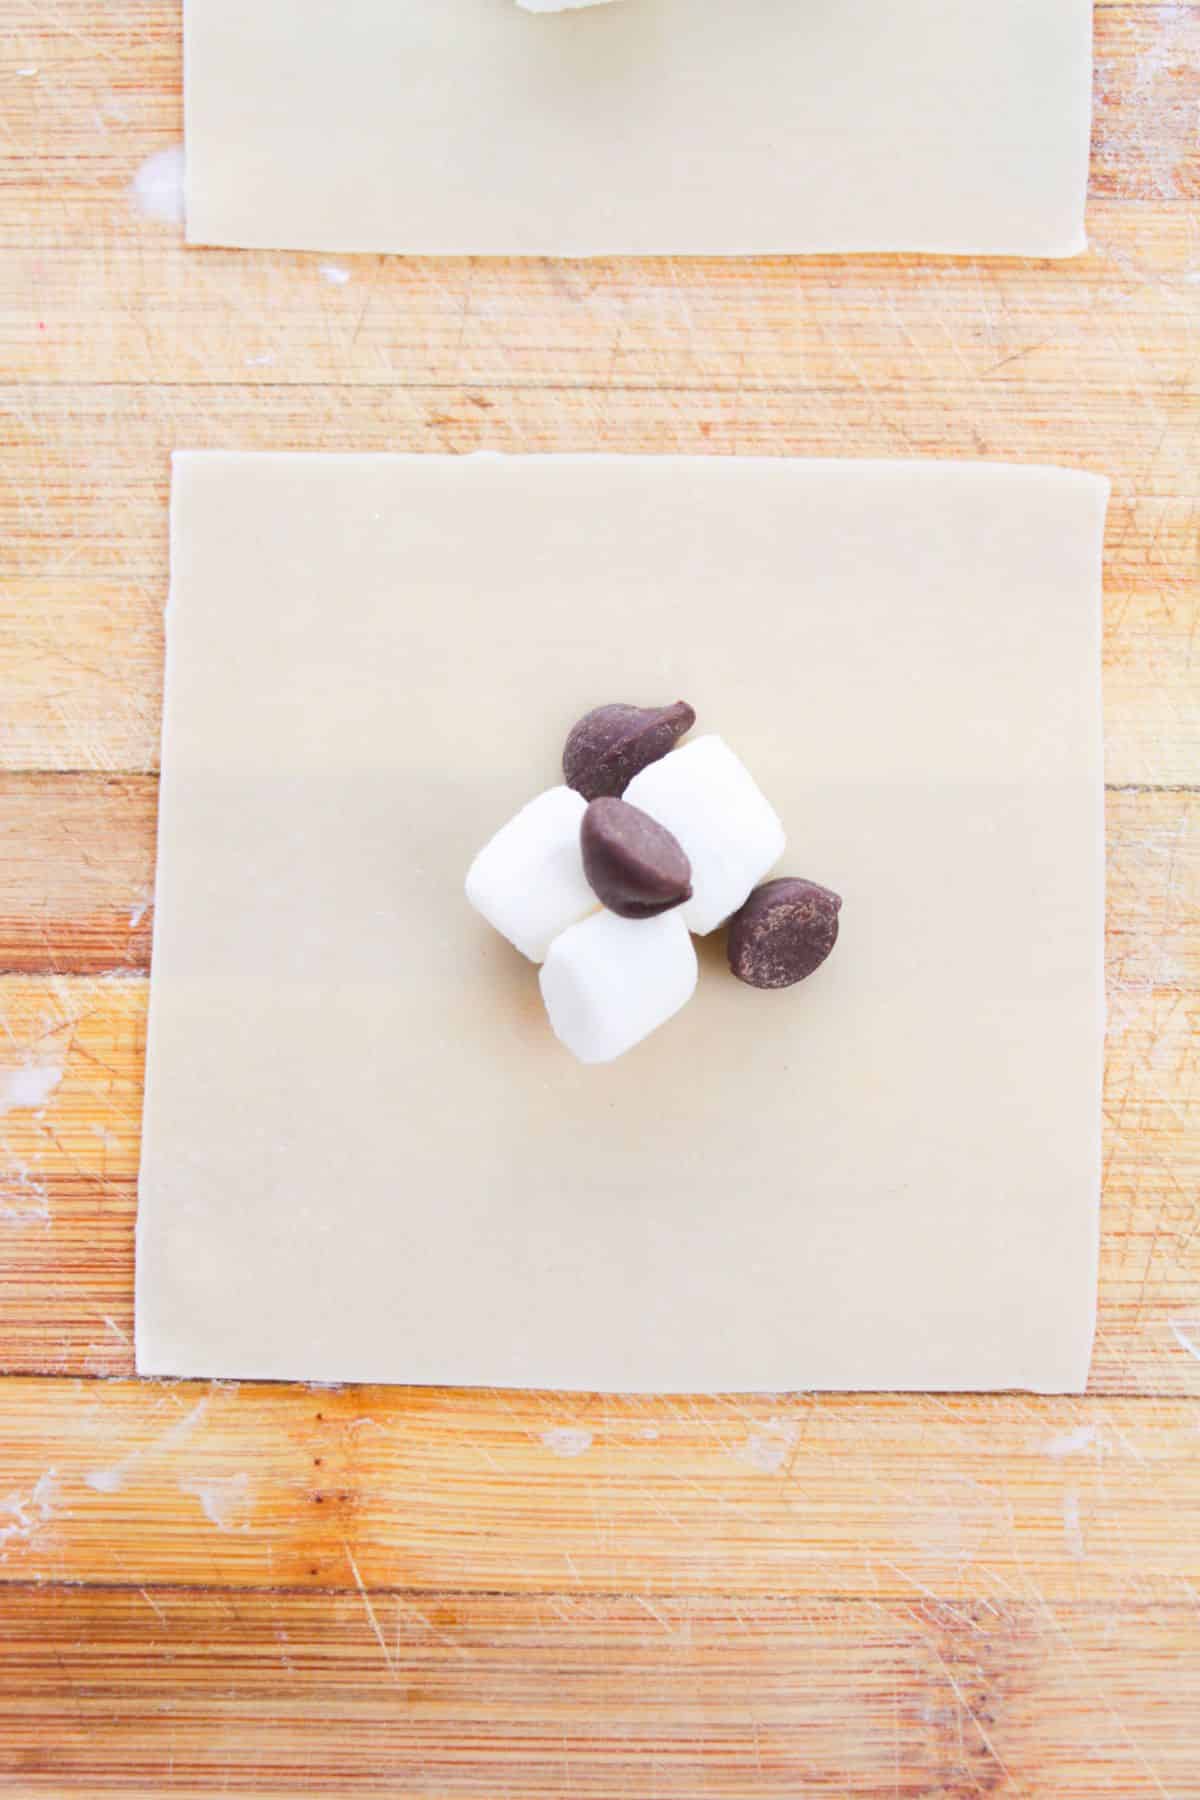 Wonton wrapper with chocolate chips and marshmallows on top.